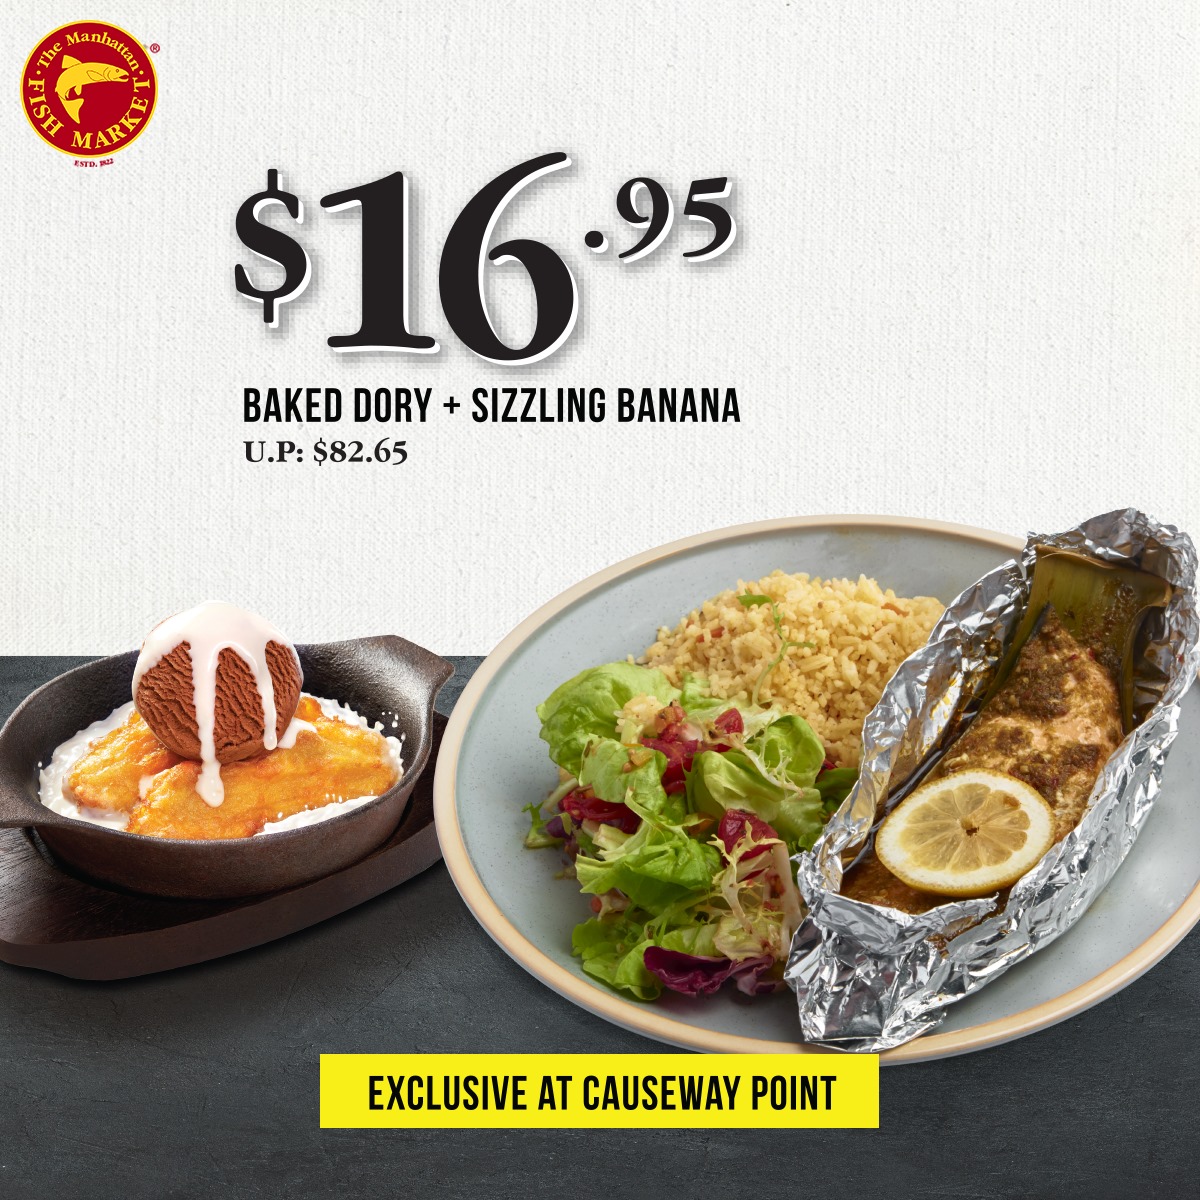 Flash these coupons from The Manhattan FISH MARKET on your mobile devices to enjoy great savings - 10